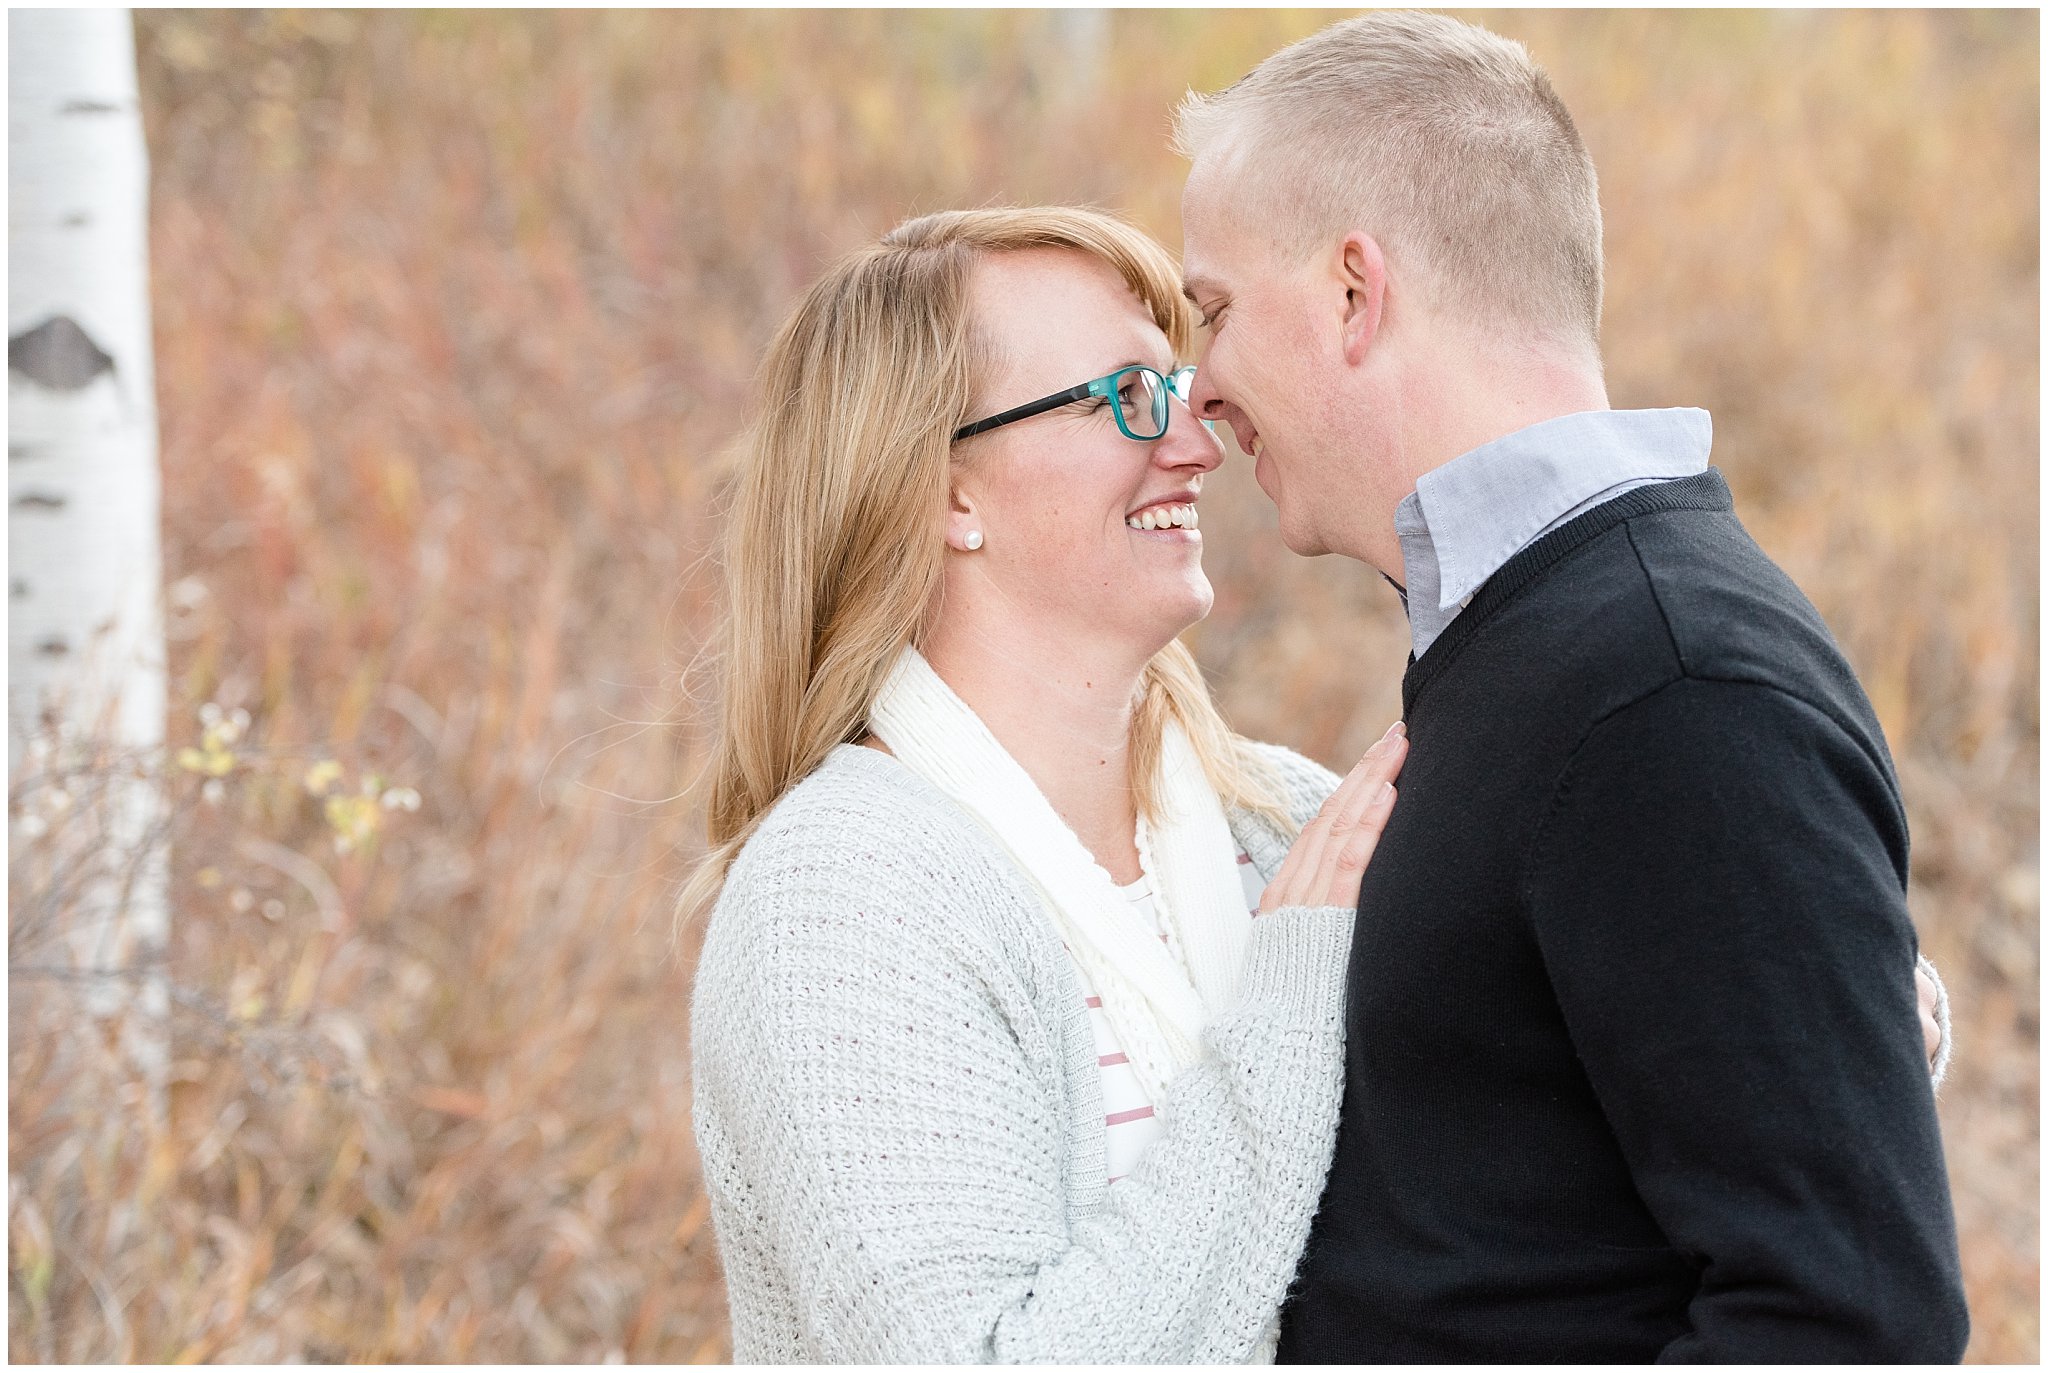 Couple nuzzling close in the cold fall weather | Fall Family Pictures in the Mountains | Snowbasin, Utah | Jessie and Dallin Photography